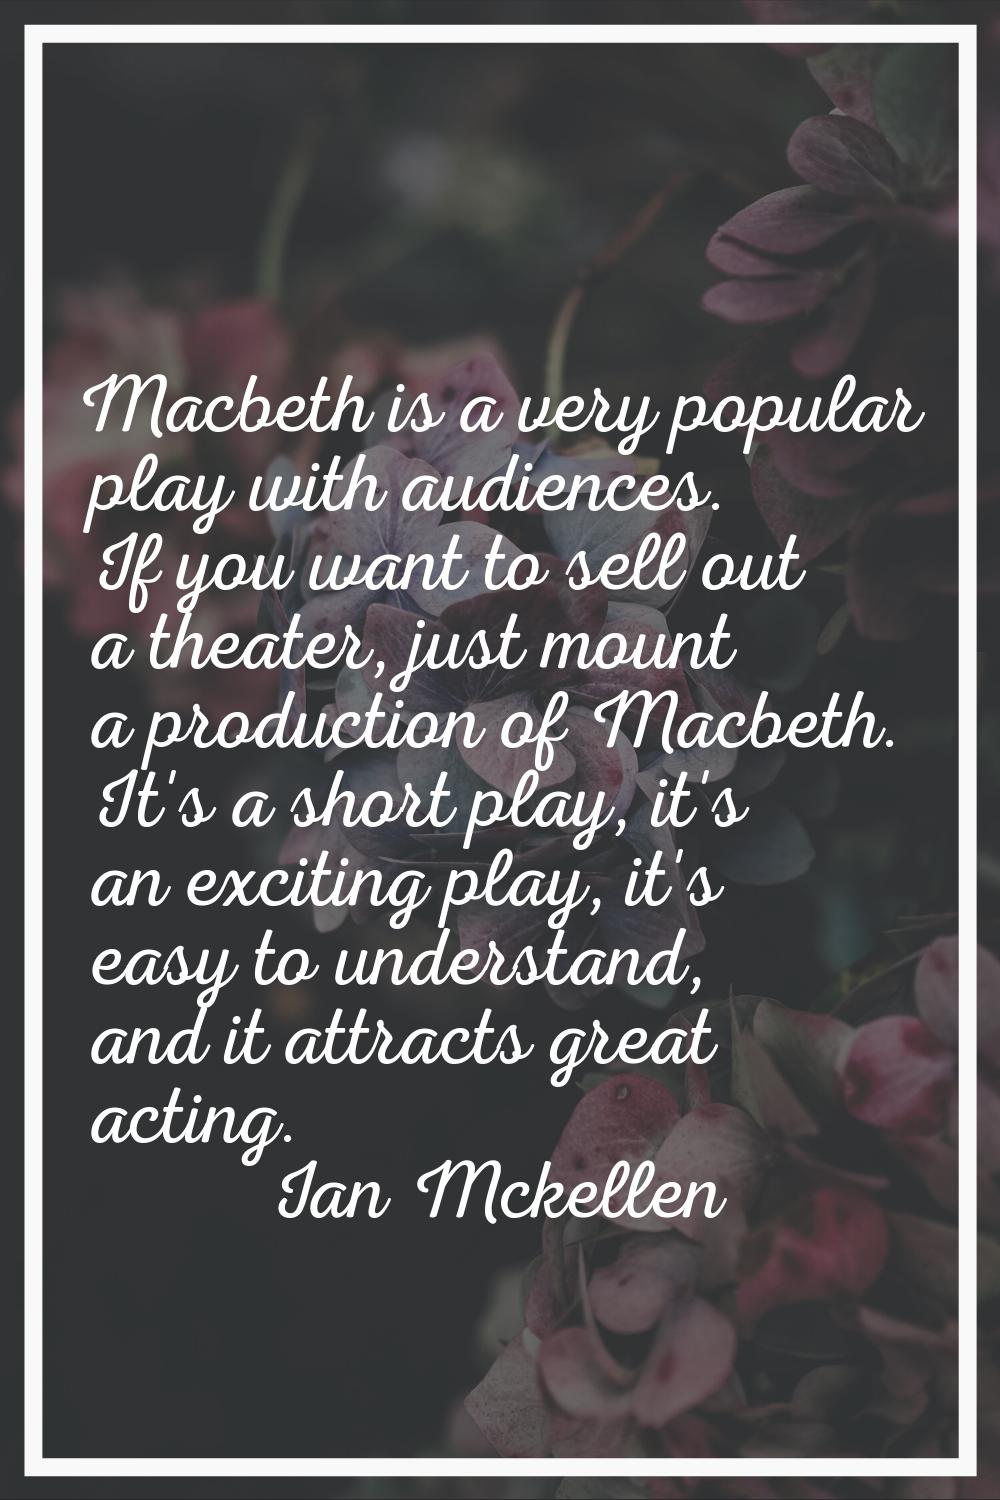 Macbeth is a very popular play with audiences. If you want to sell out a theater, just mount a prod